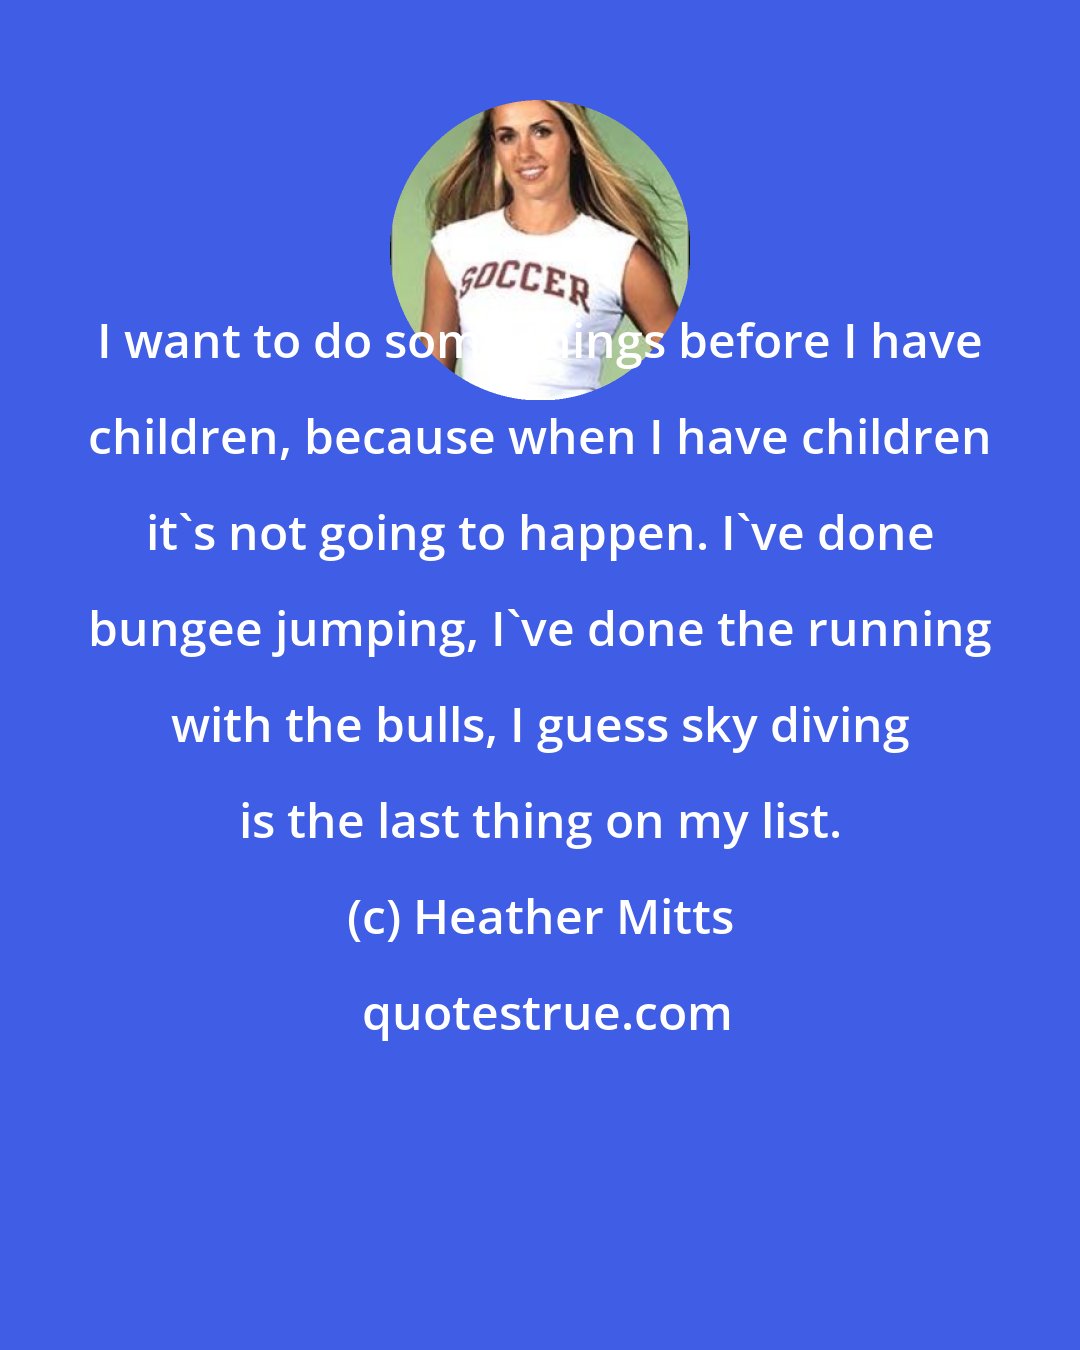 Heather Mitts: I want to do some things before I have children, because when I have children it's not going to happen. I've done bungee jumping, I've done the running with the bulls, I guess sky diving is the last thing on my list.